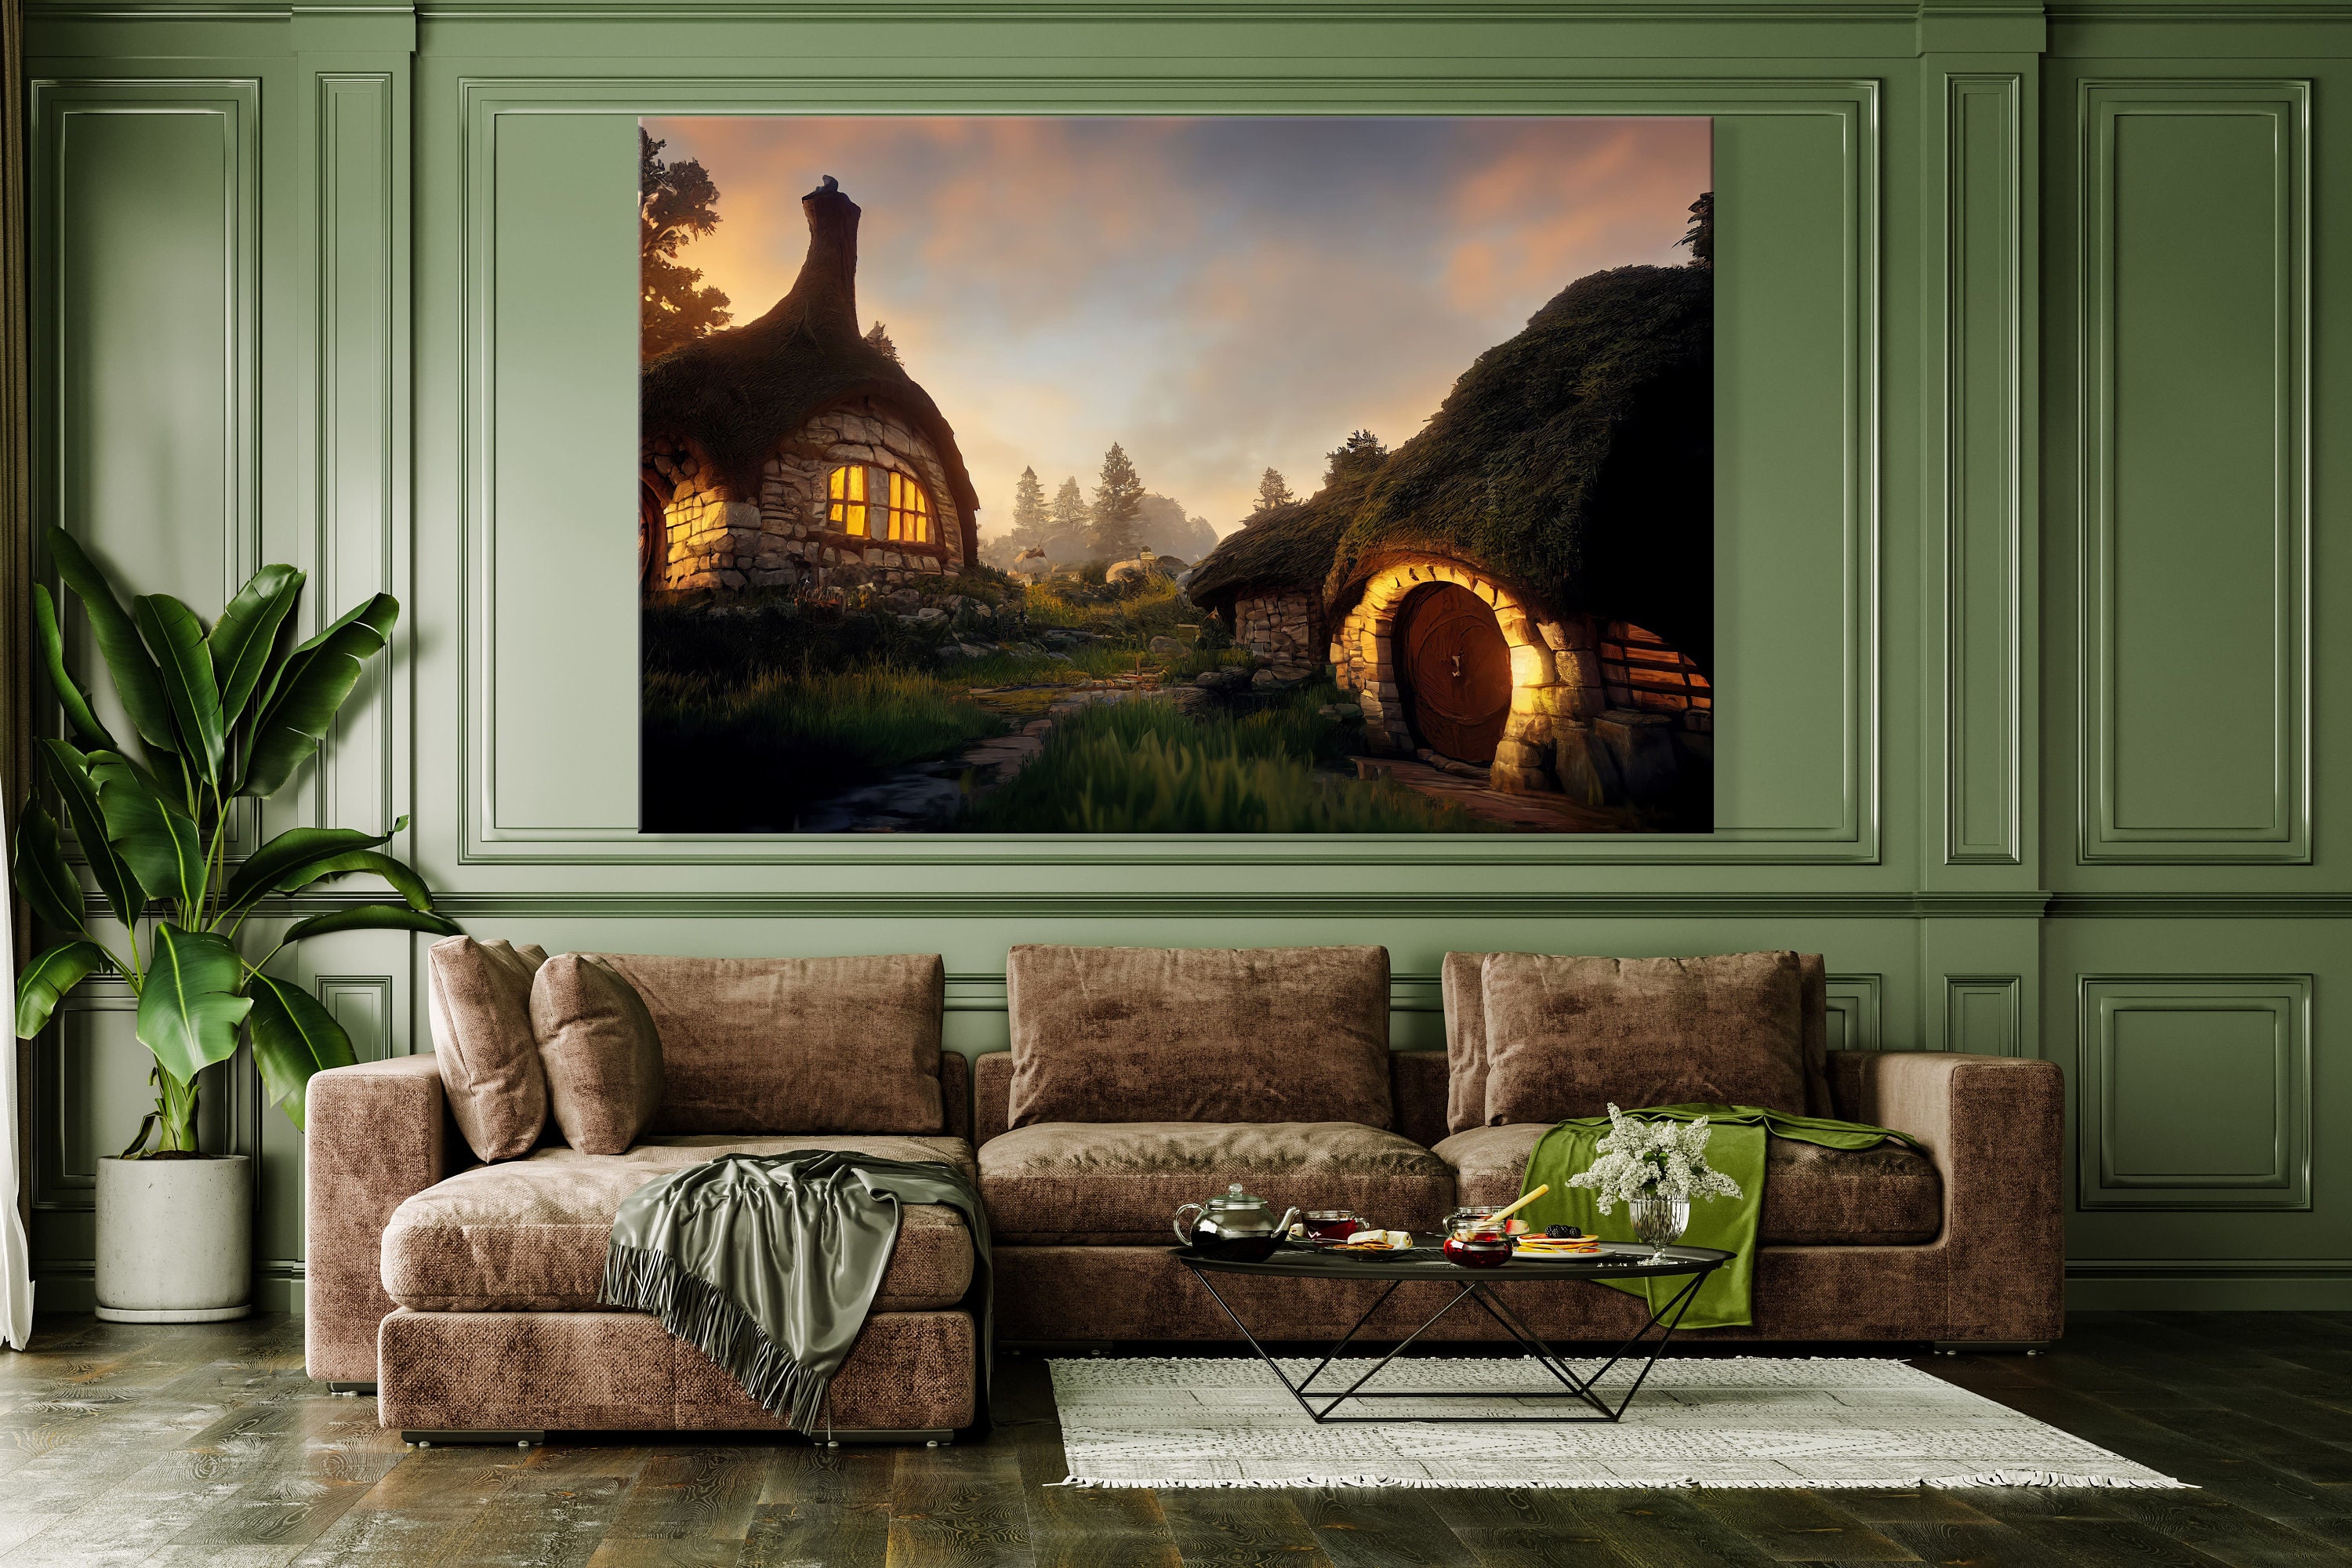 Hobbit-inspired Homes: Unique Handcrafted Home Decor - Etsy